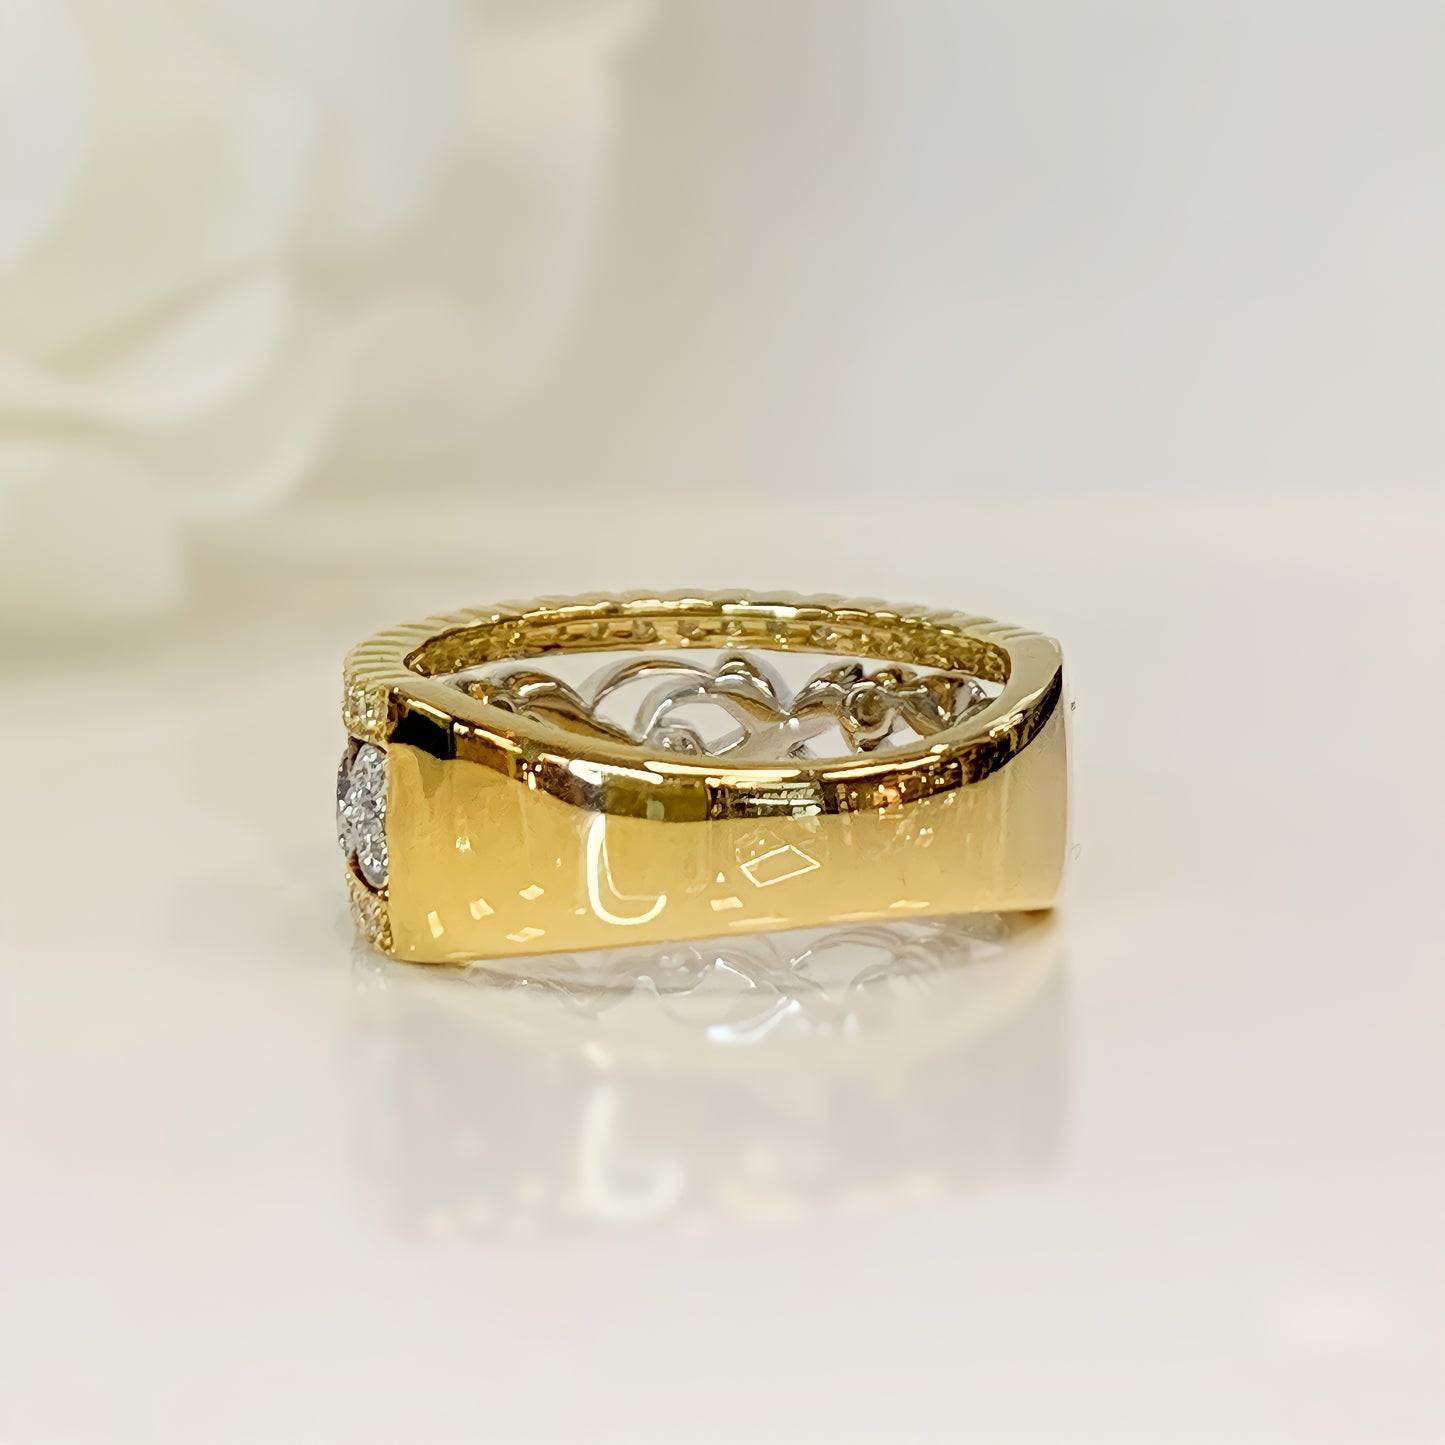 18ct Floral Inspired Yellow Gold And White Gold Diamond Ring – SIZE N